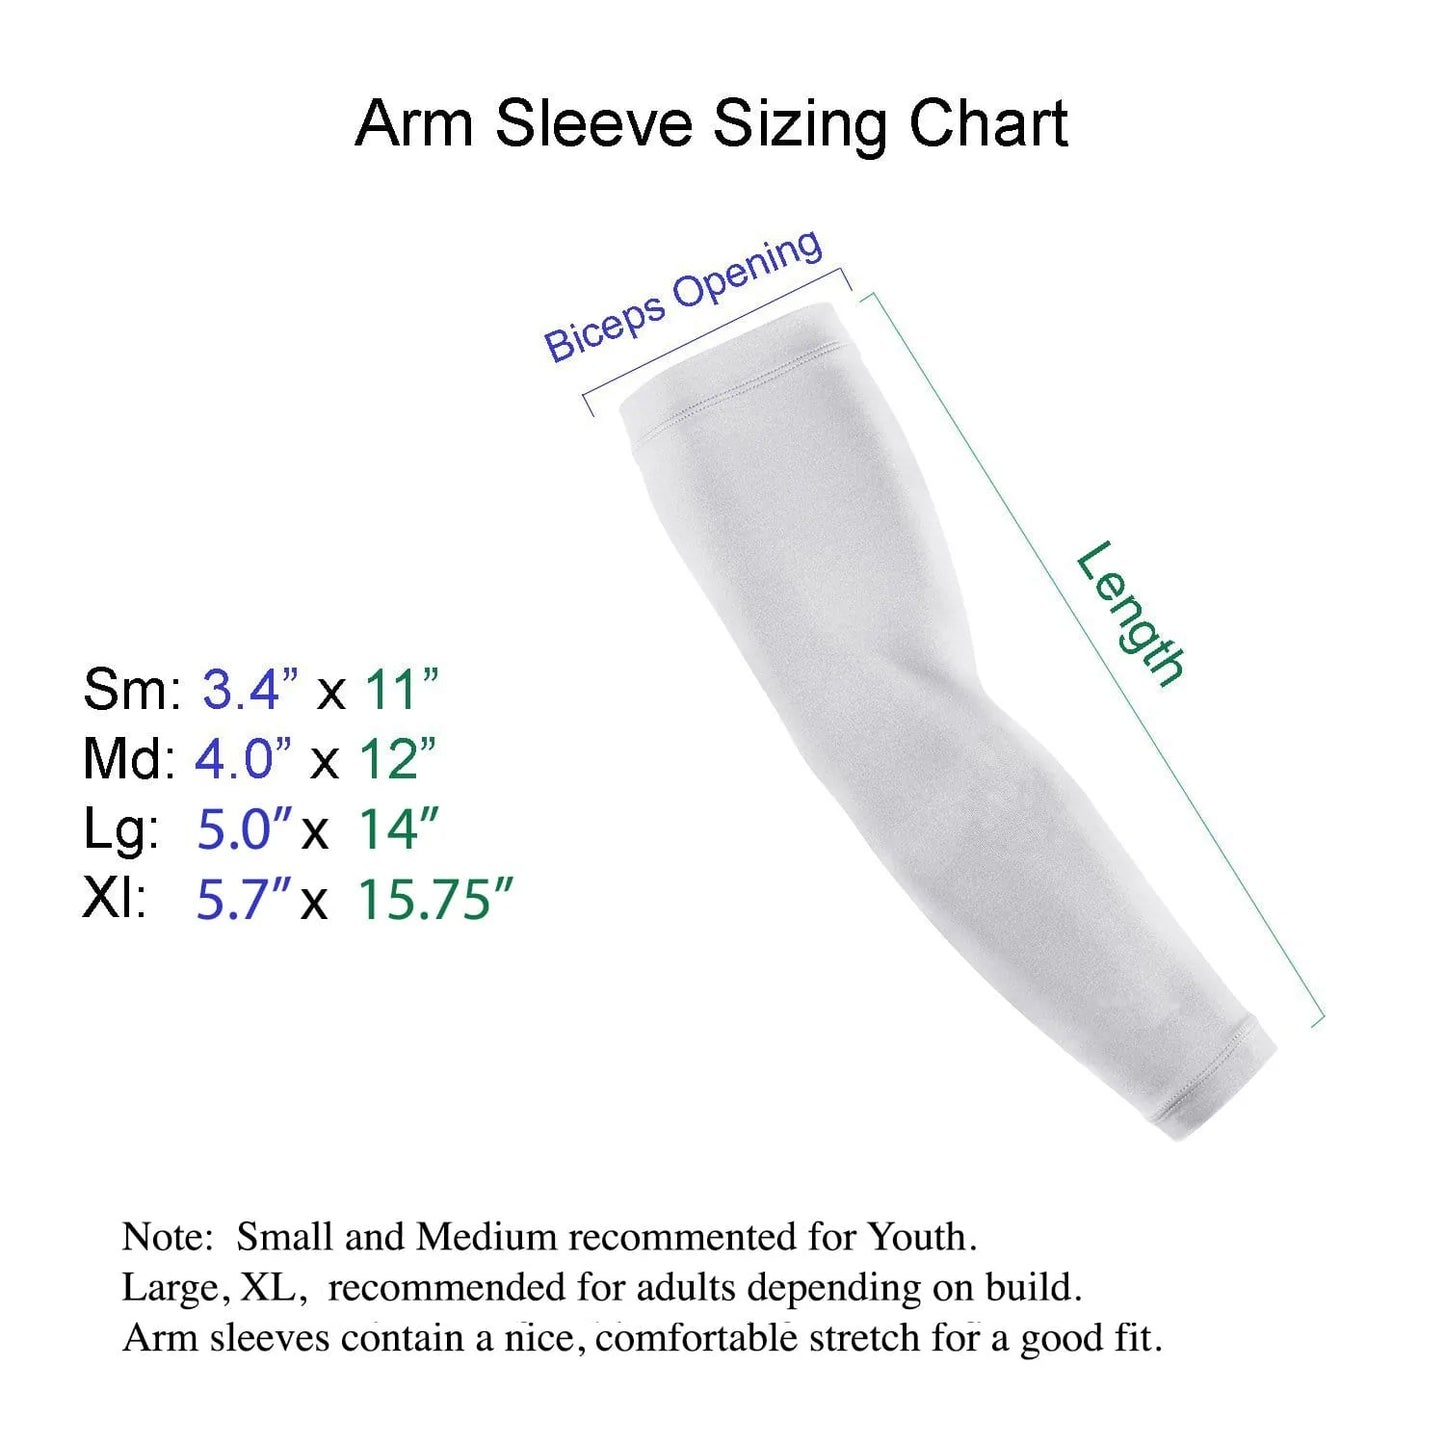 PA Playmakers - Arm Sleeve